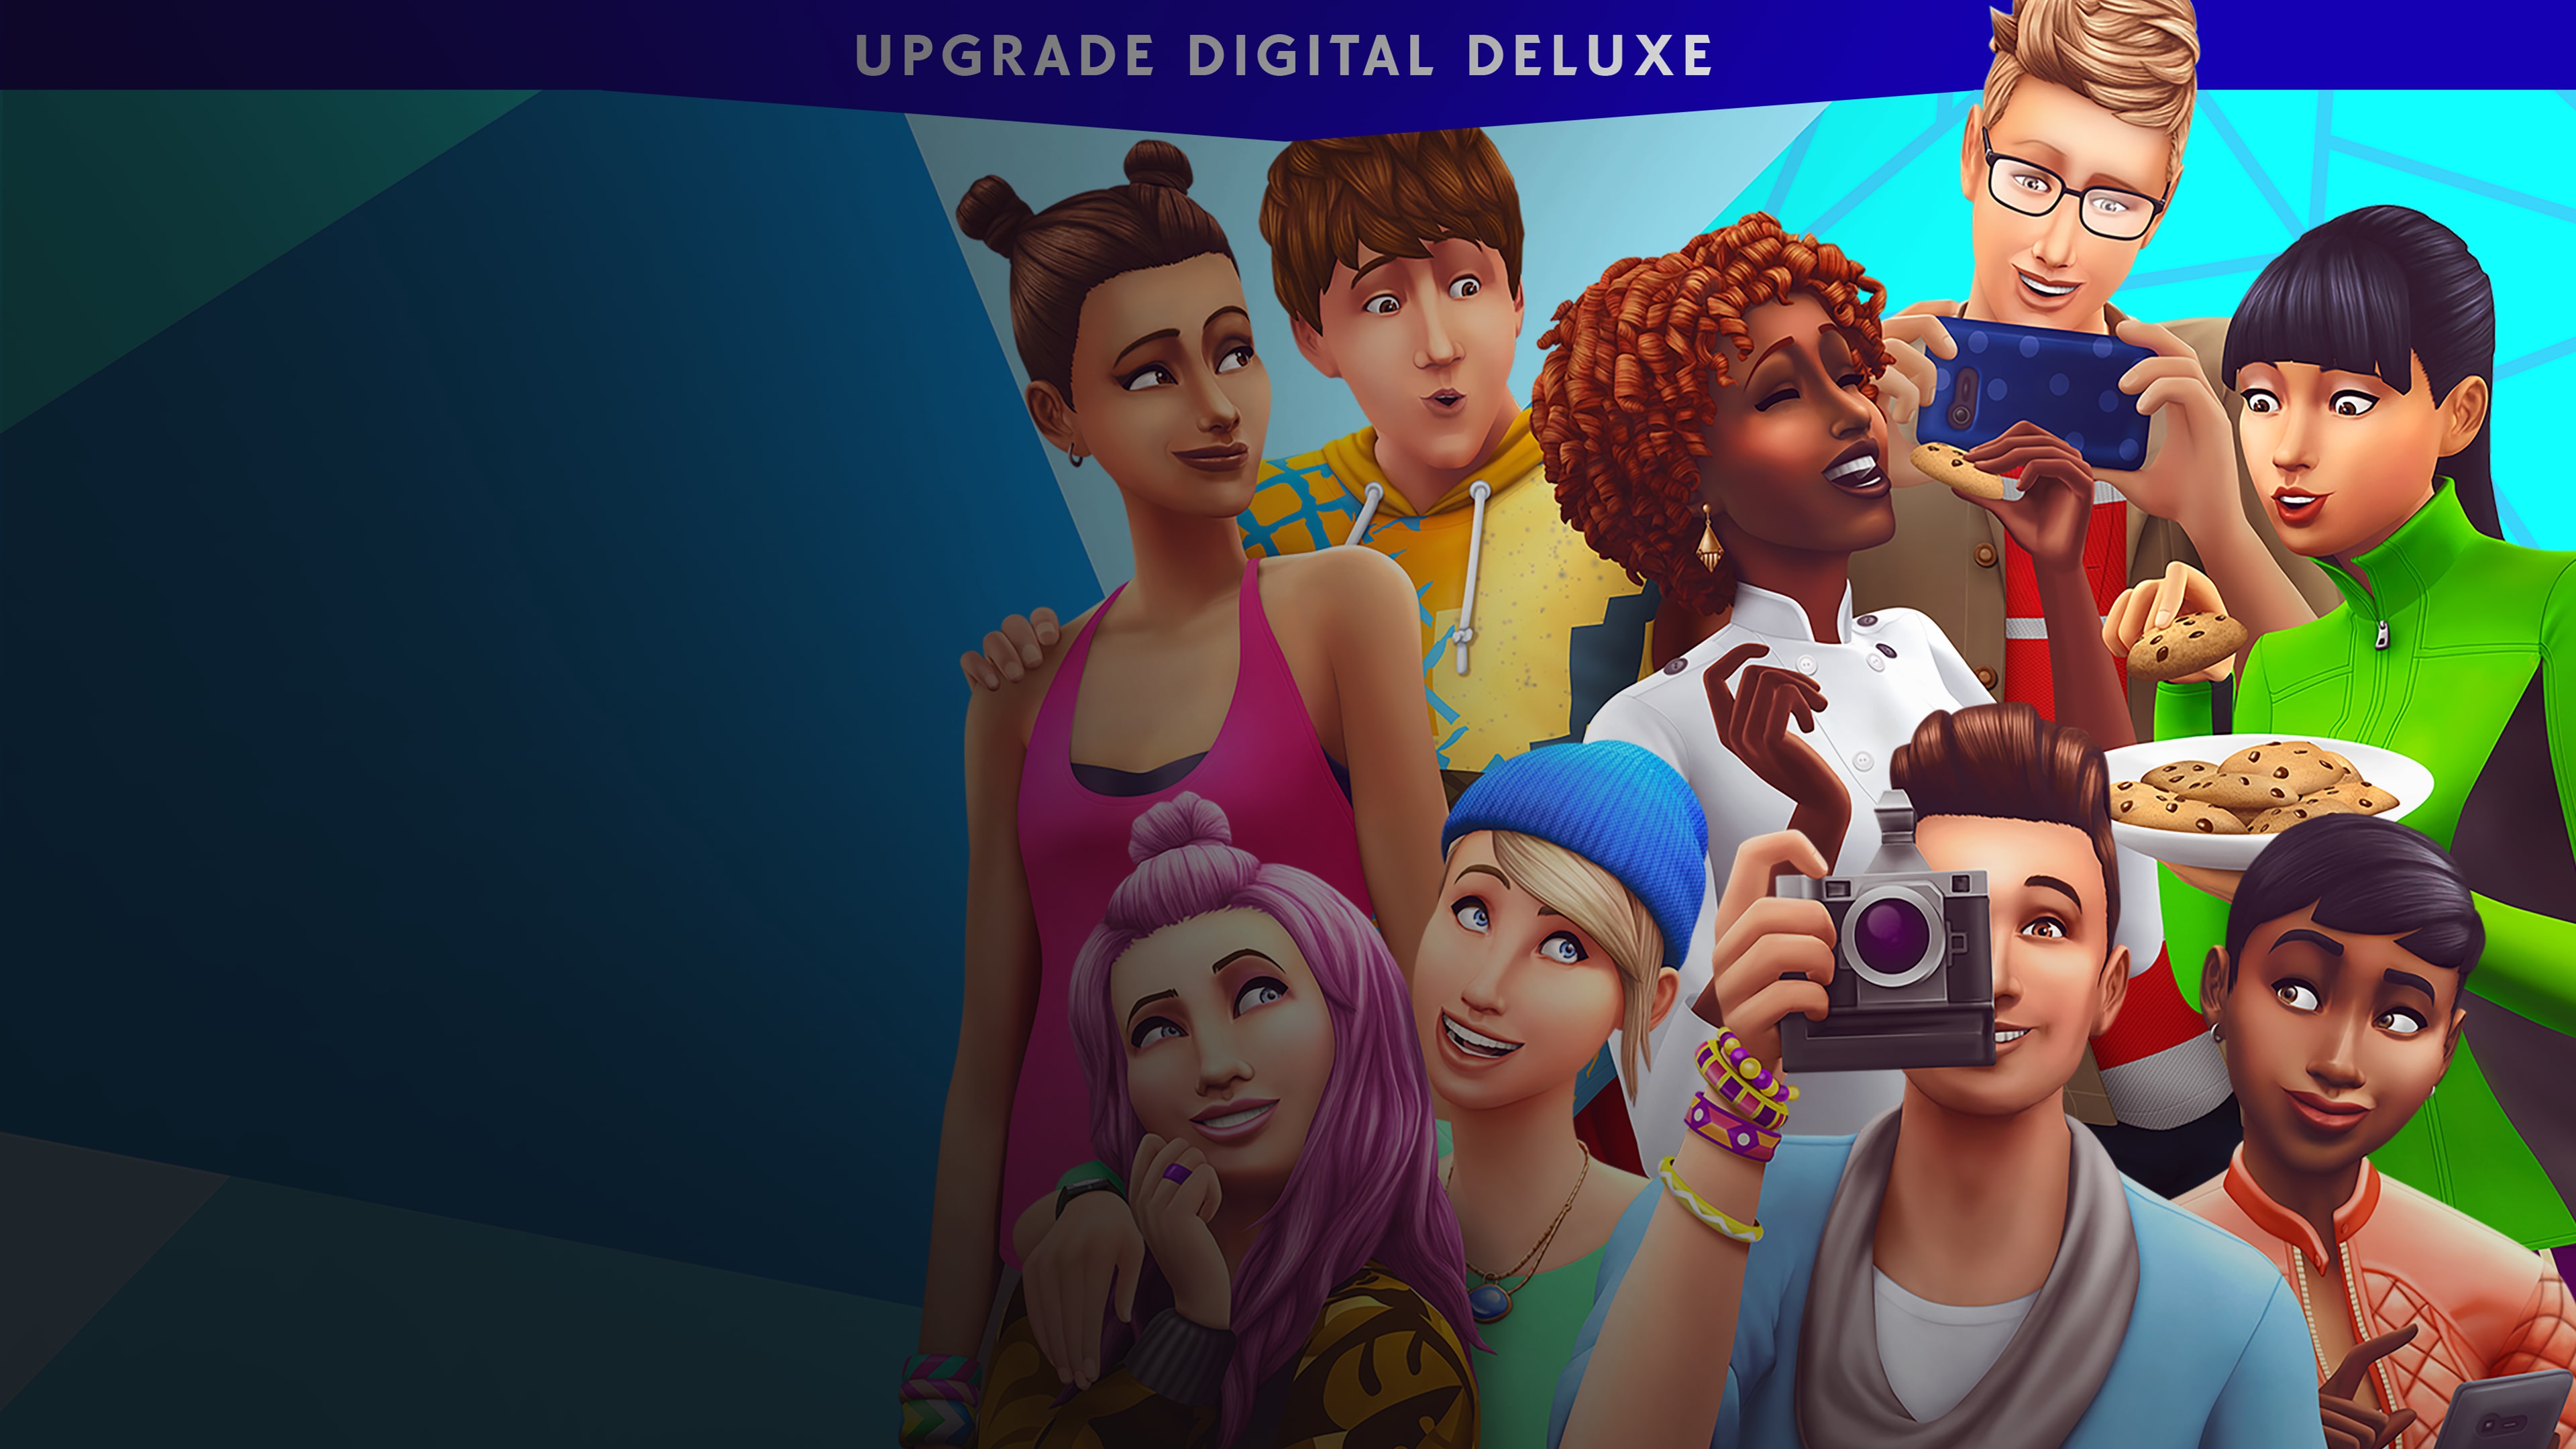 The Sims™ 4 Digital Deluxe Upgrade